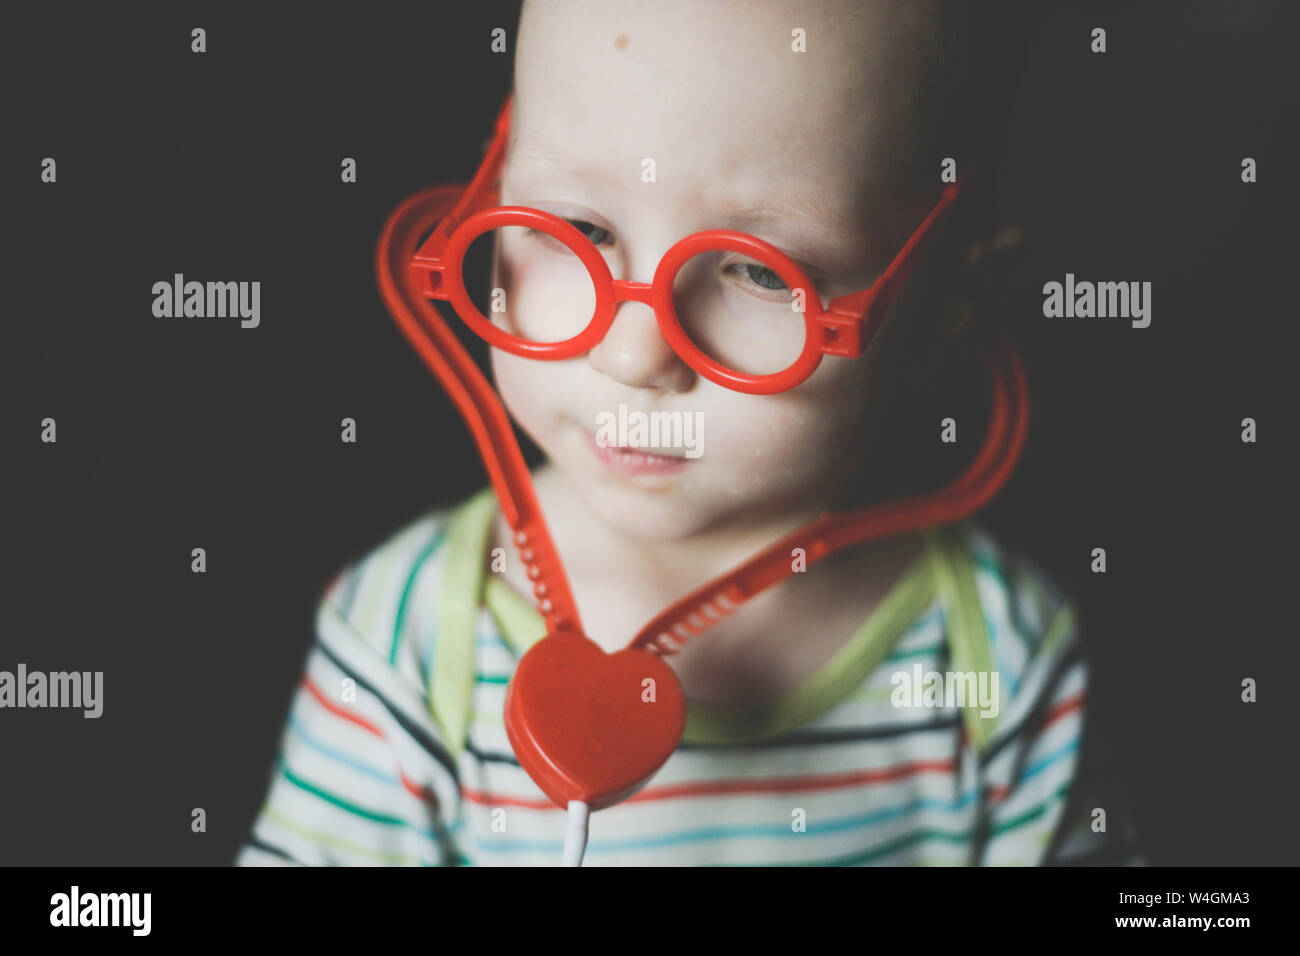 Portrait of toddler boy wearing oversized red toy glasses and toy stethoscope Stock Photo